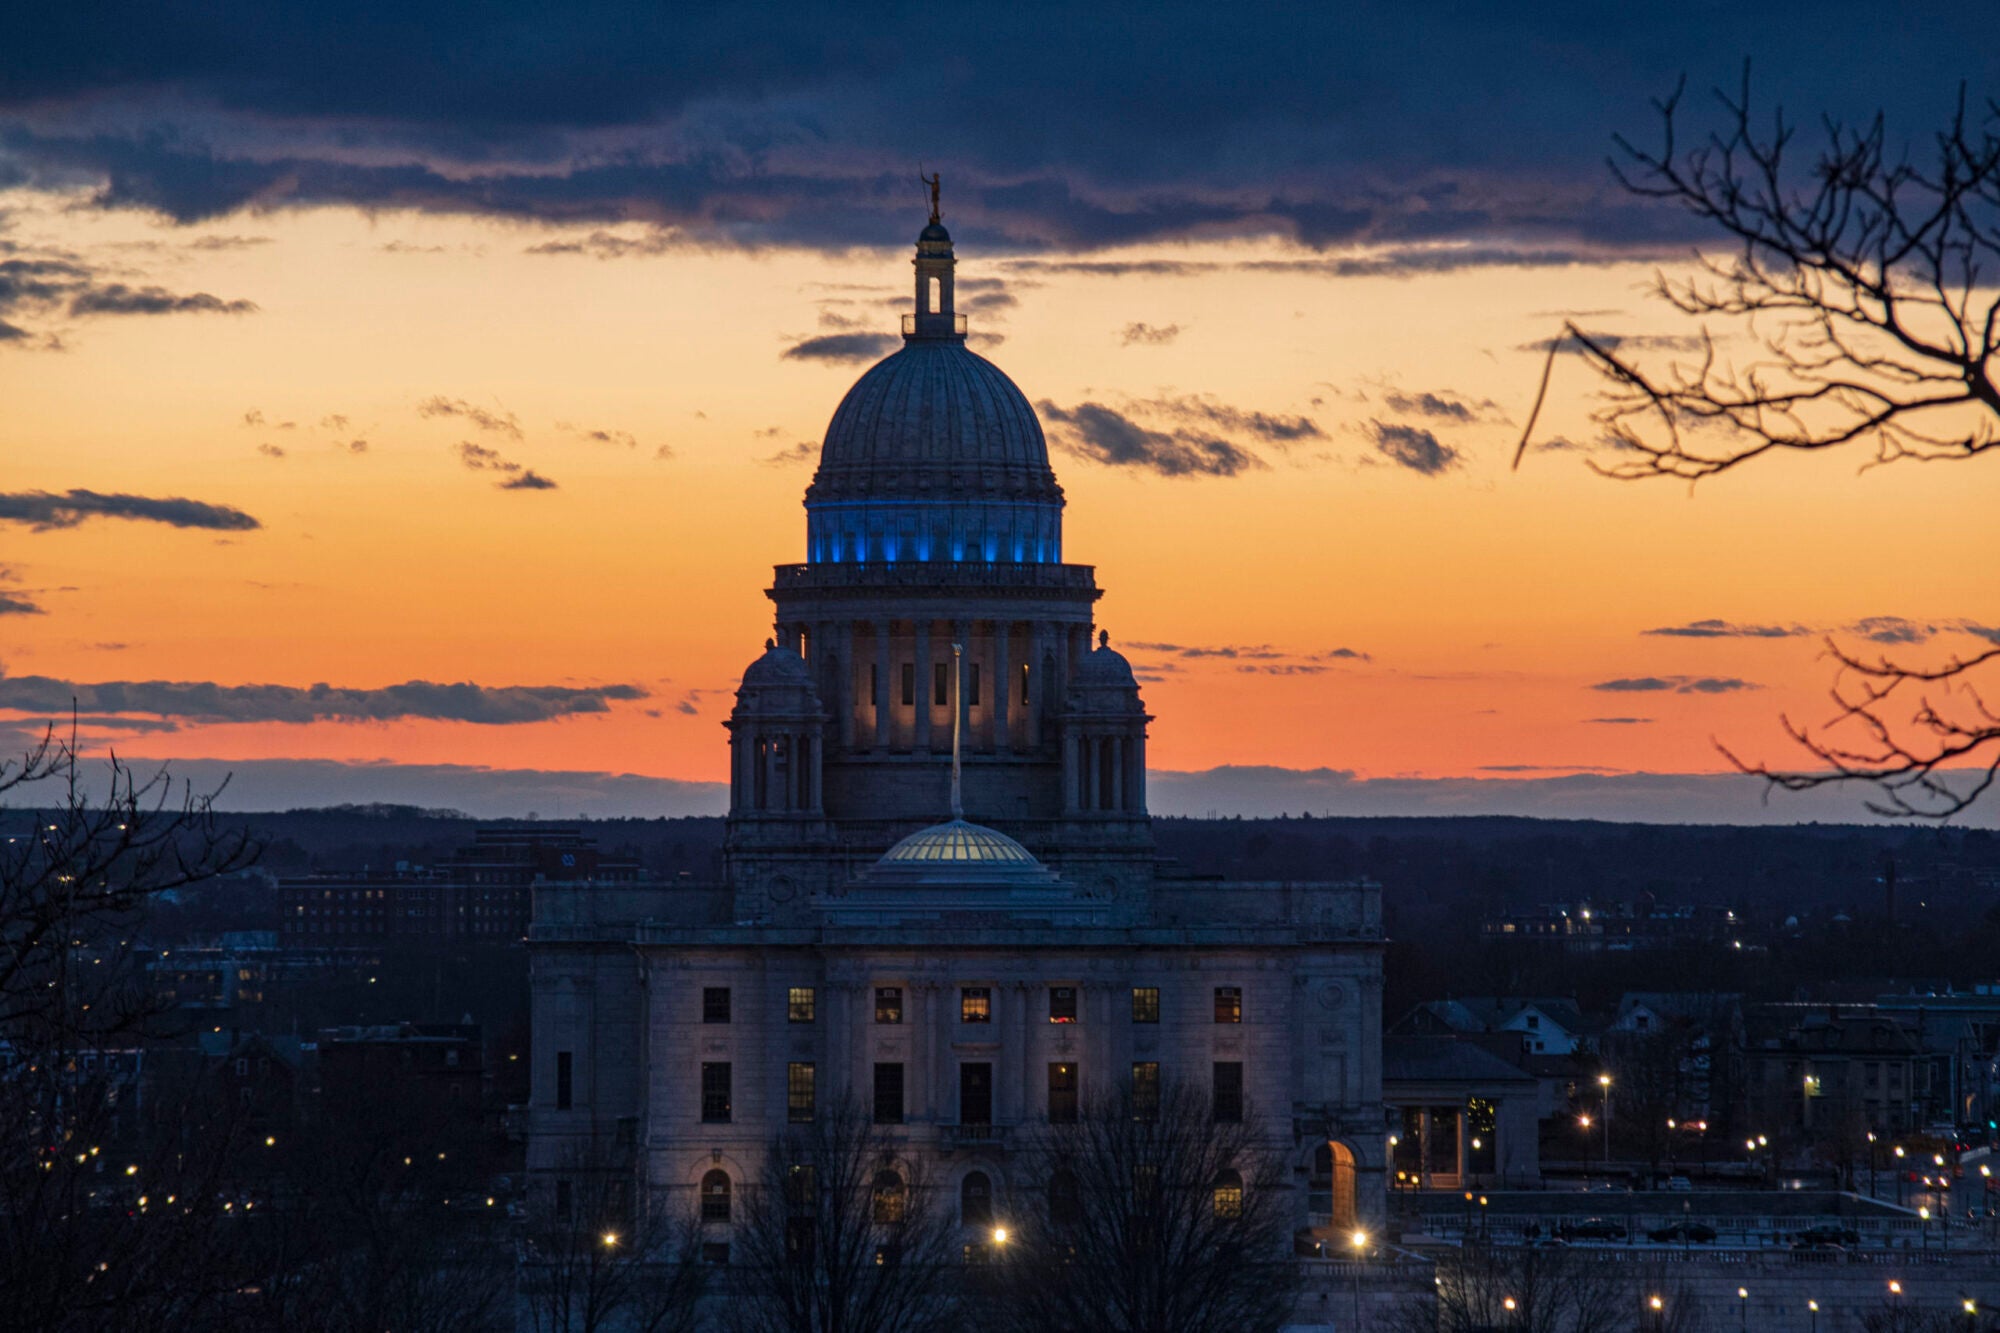 The RI state capital silhouetted against the sunset